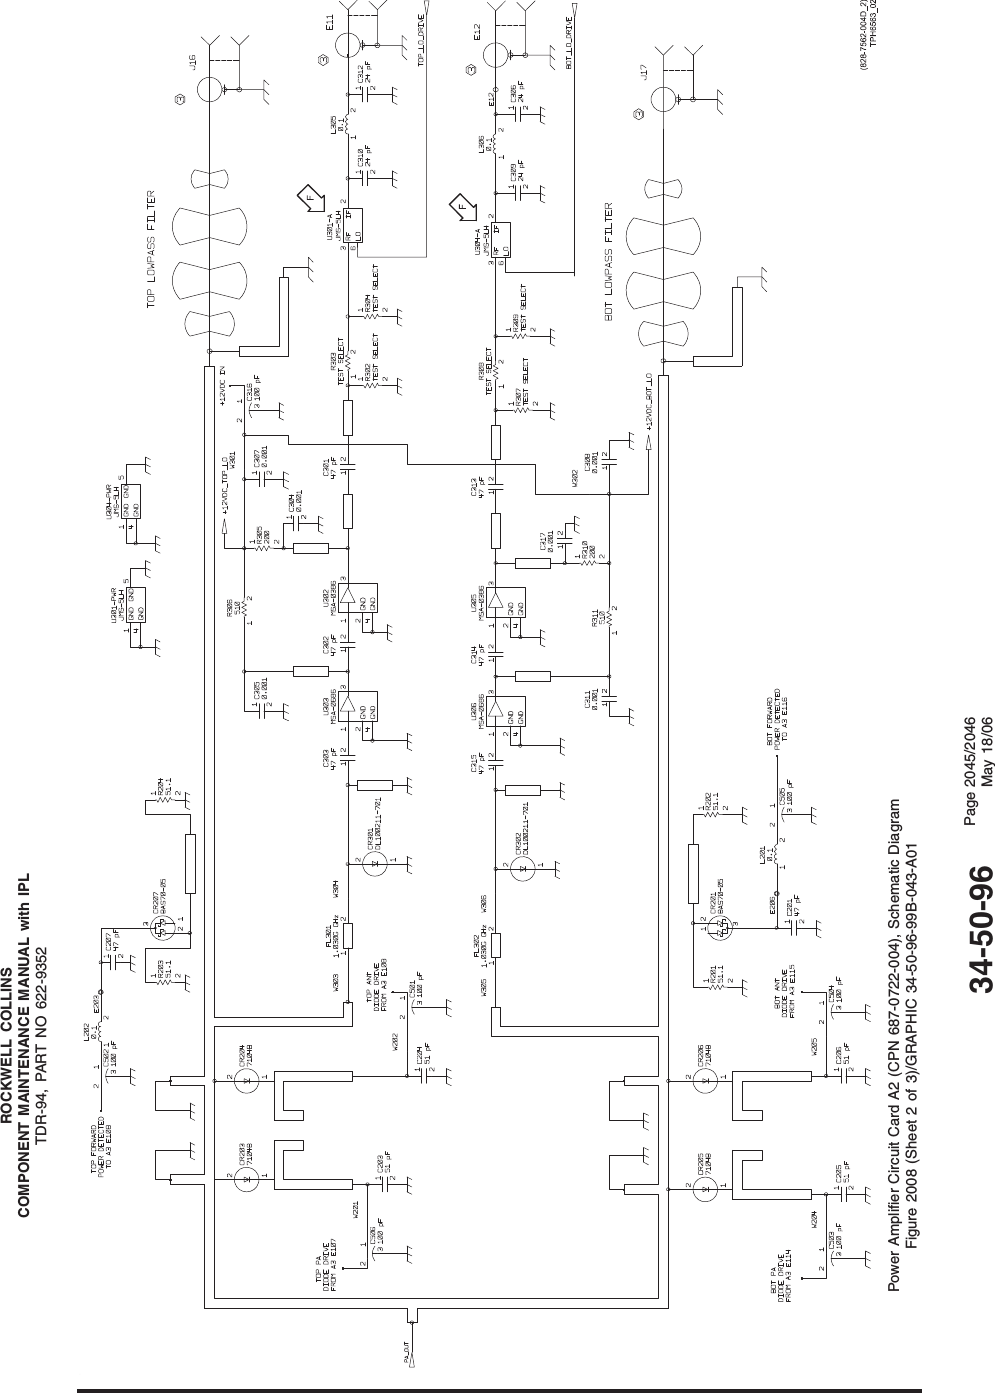 ROCKWELL COLLINSCOMPONENT MAINTENANCE MANUAL with IPLTDR-94, PART NO 622-9352Power Amplifier Circuit Card A2 (CPN 687-0722-004), Schematic DiagramFigure 2008 (Sheet 2 of 3)/GRAPHIC 34-50-96-99B-043-A0134-50-96 Page 2045/2046May 18/06